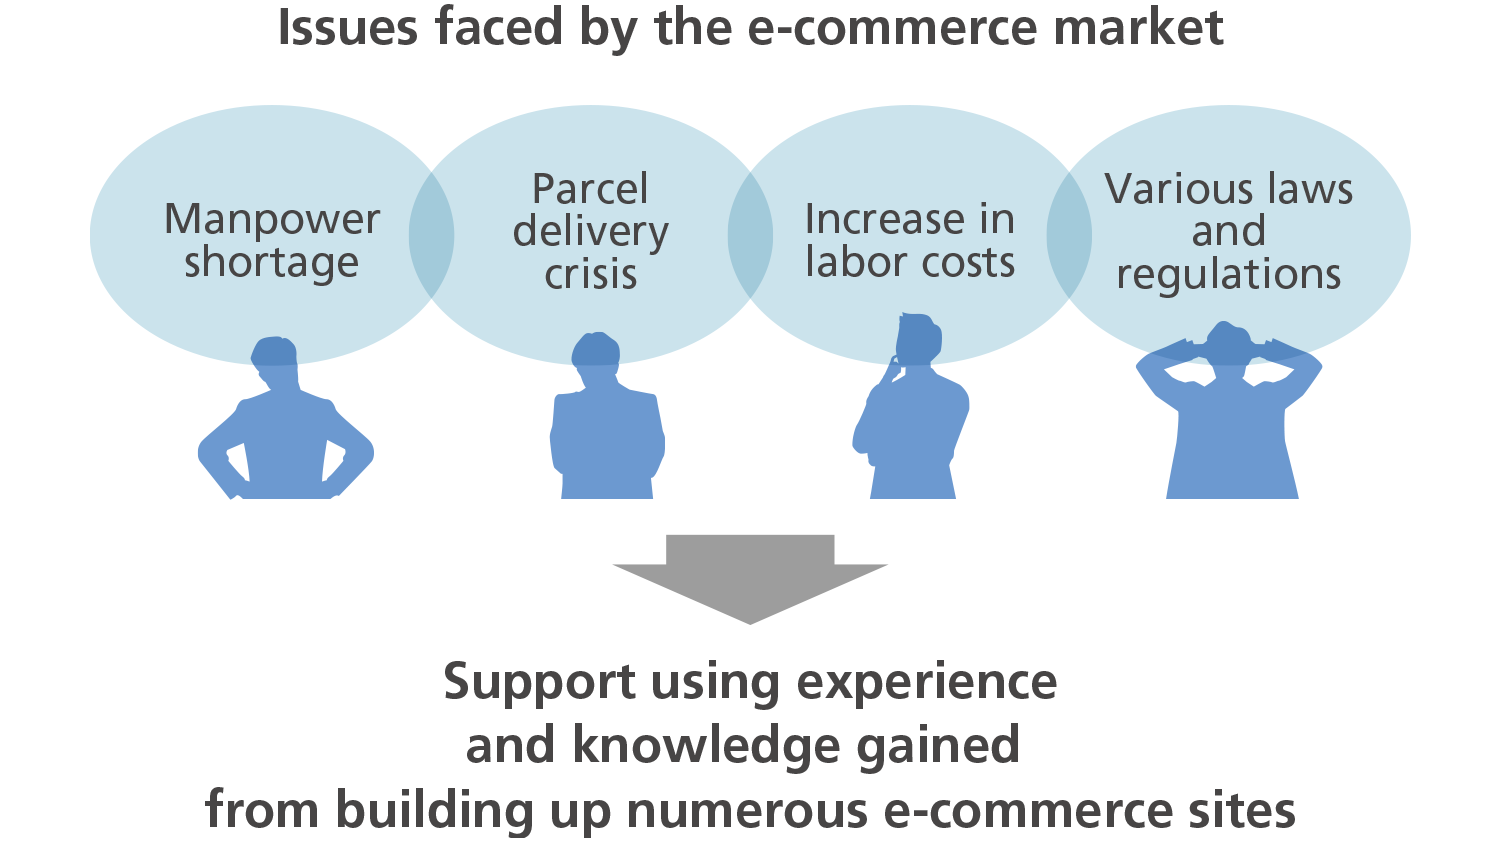 Issues faced by the e-commerce market | Support using experience and knowledge gained from building up numerous e-commerce sites